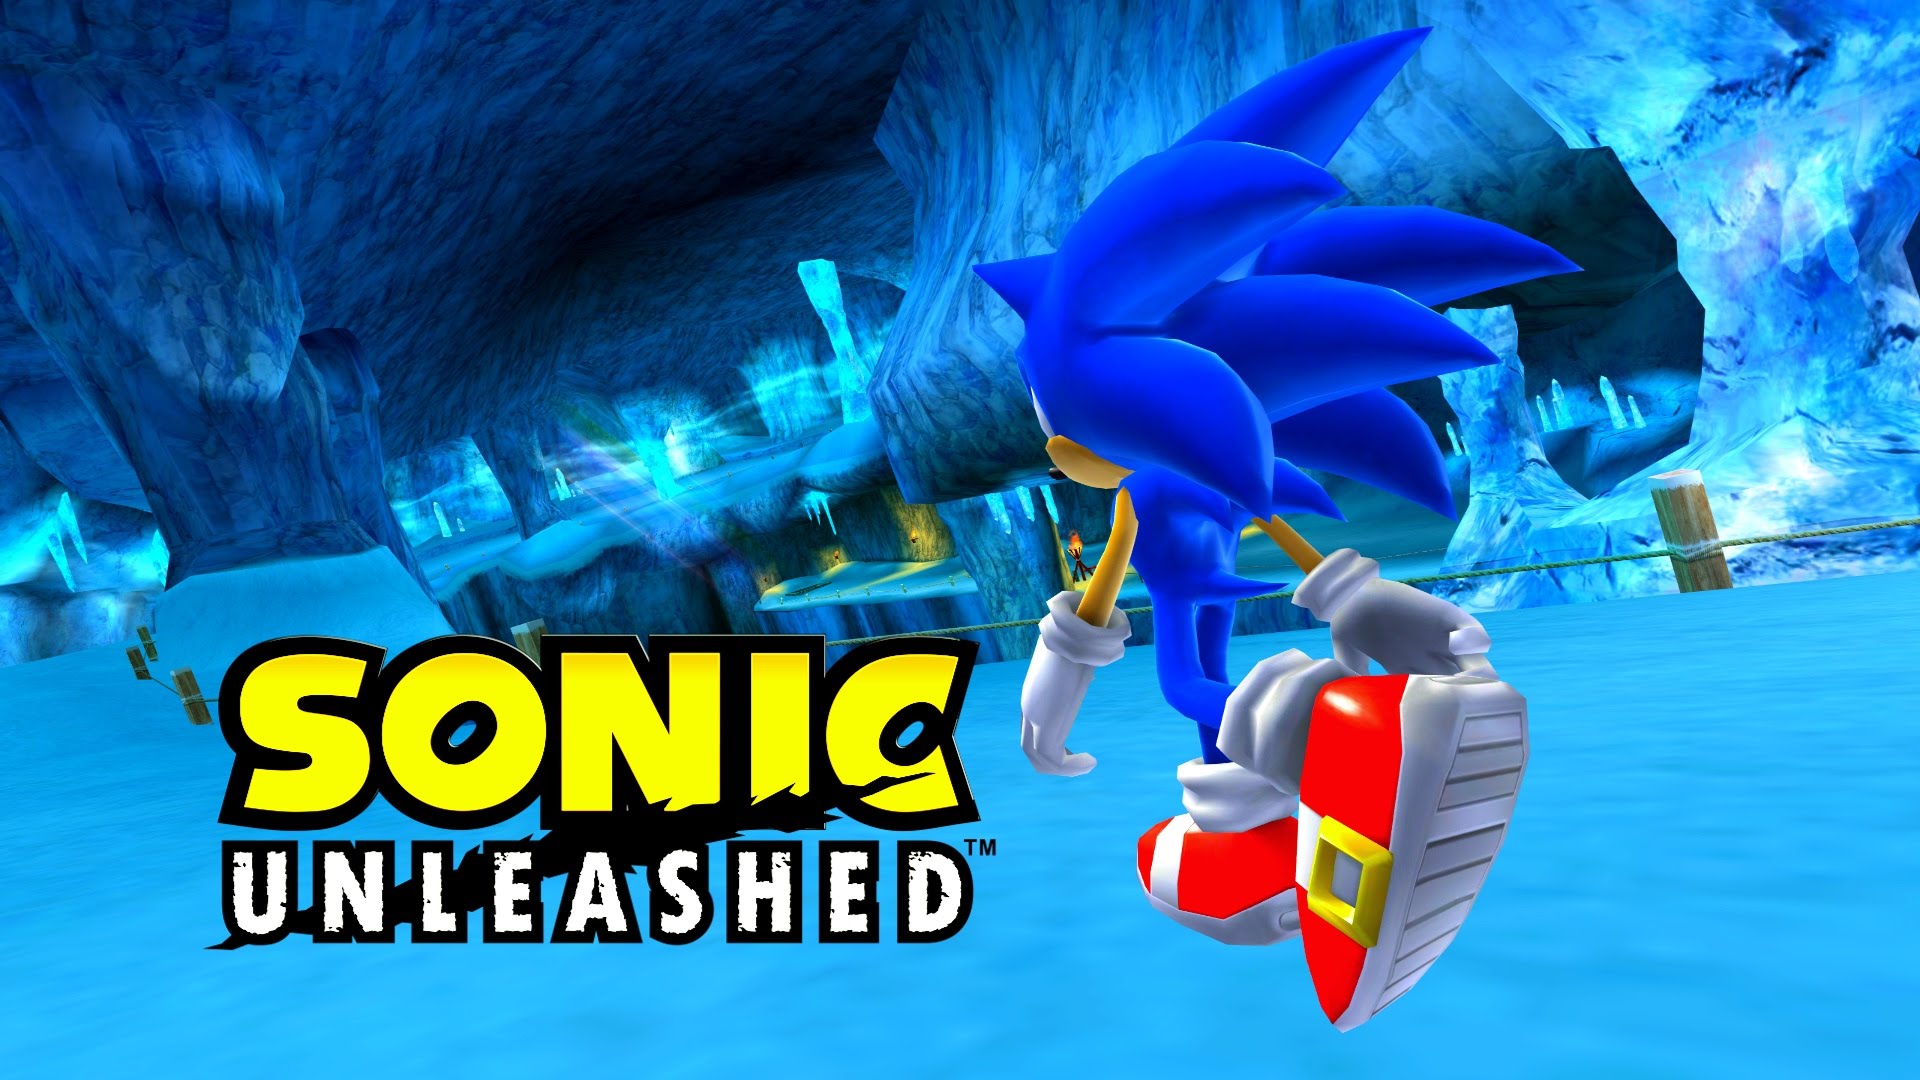 Sonic Unleashed Wii Cool Edge Day Full HD 1080p